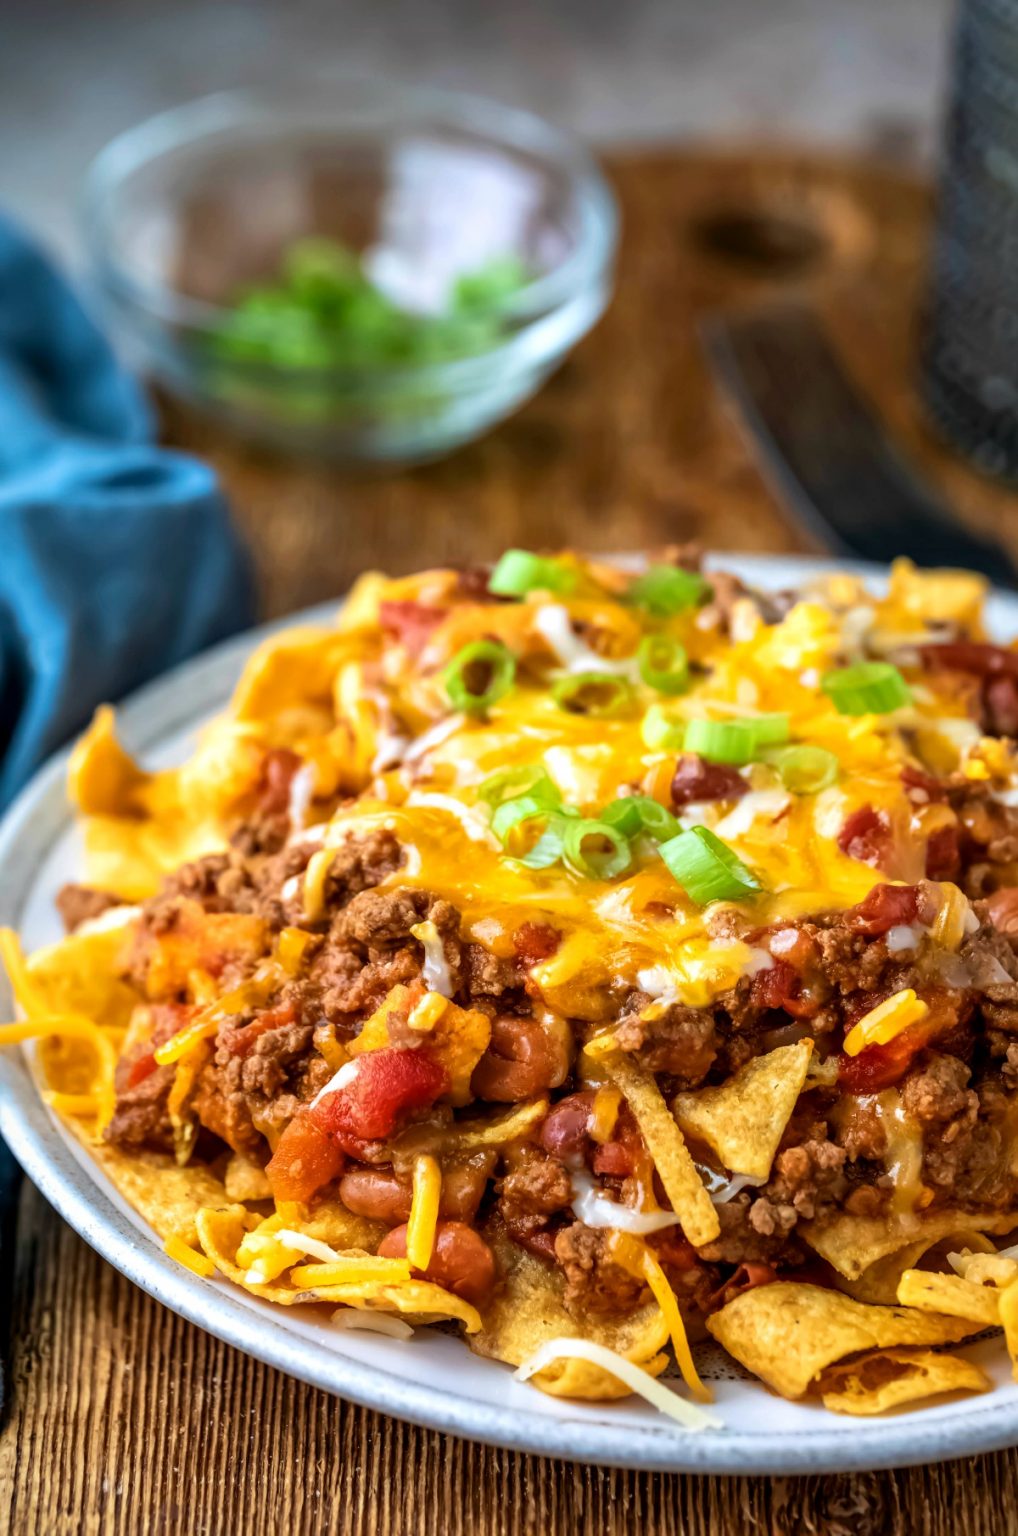 Instant Pot Chili Frito Pie - Cook Dinner Tonight